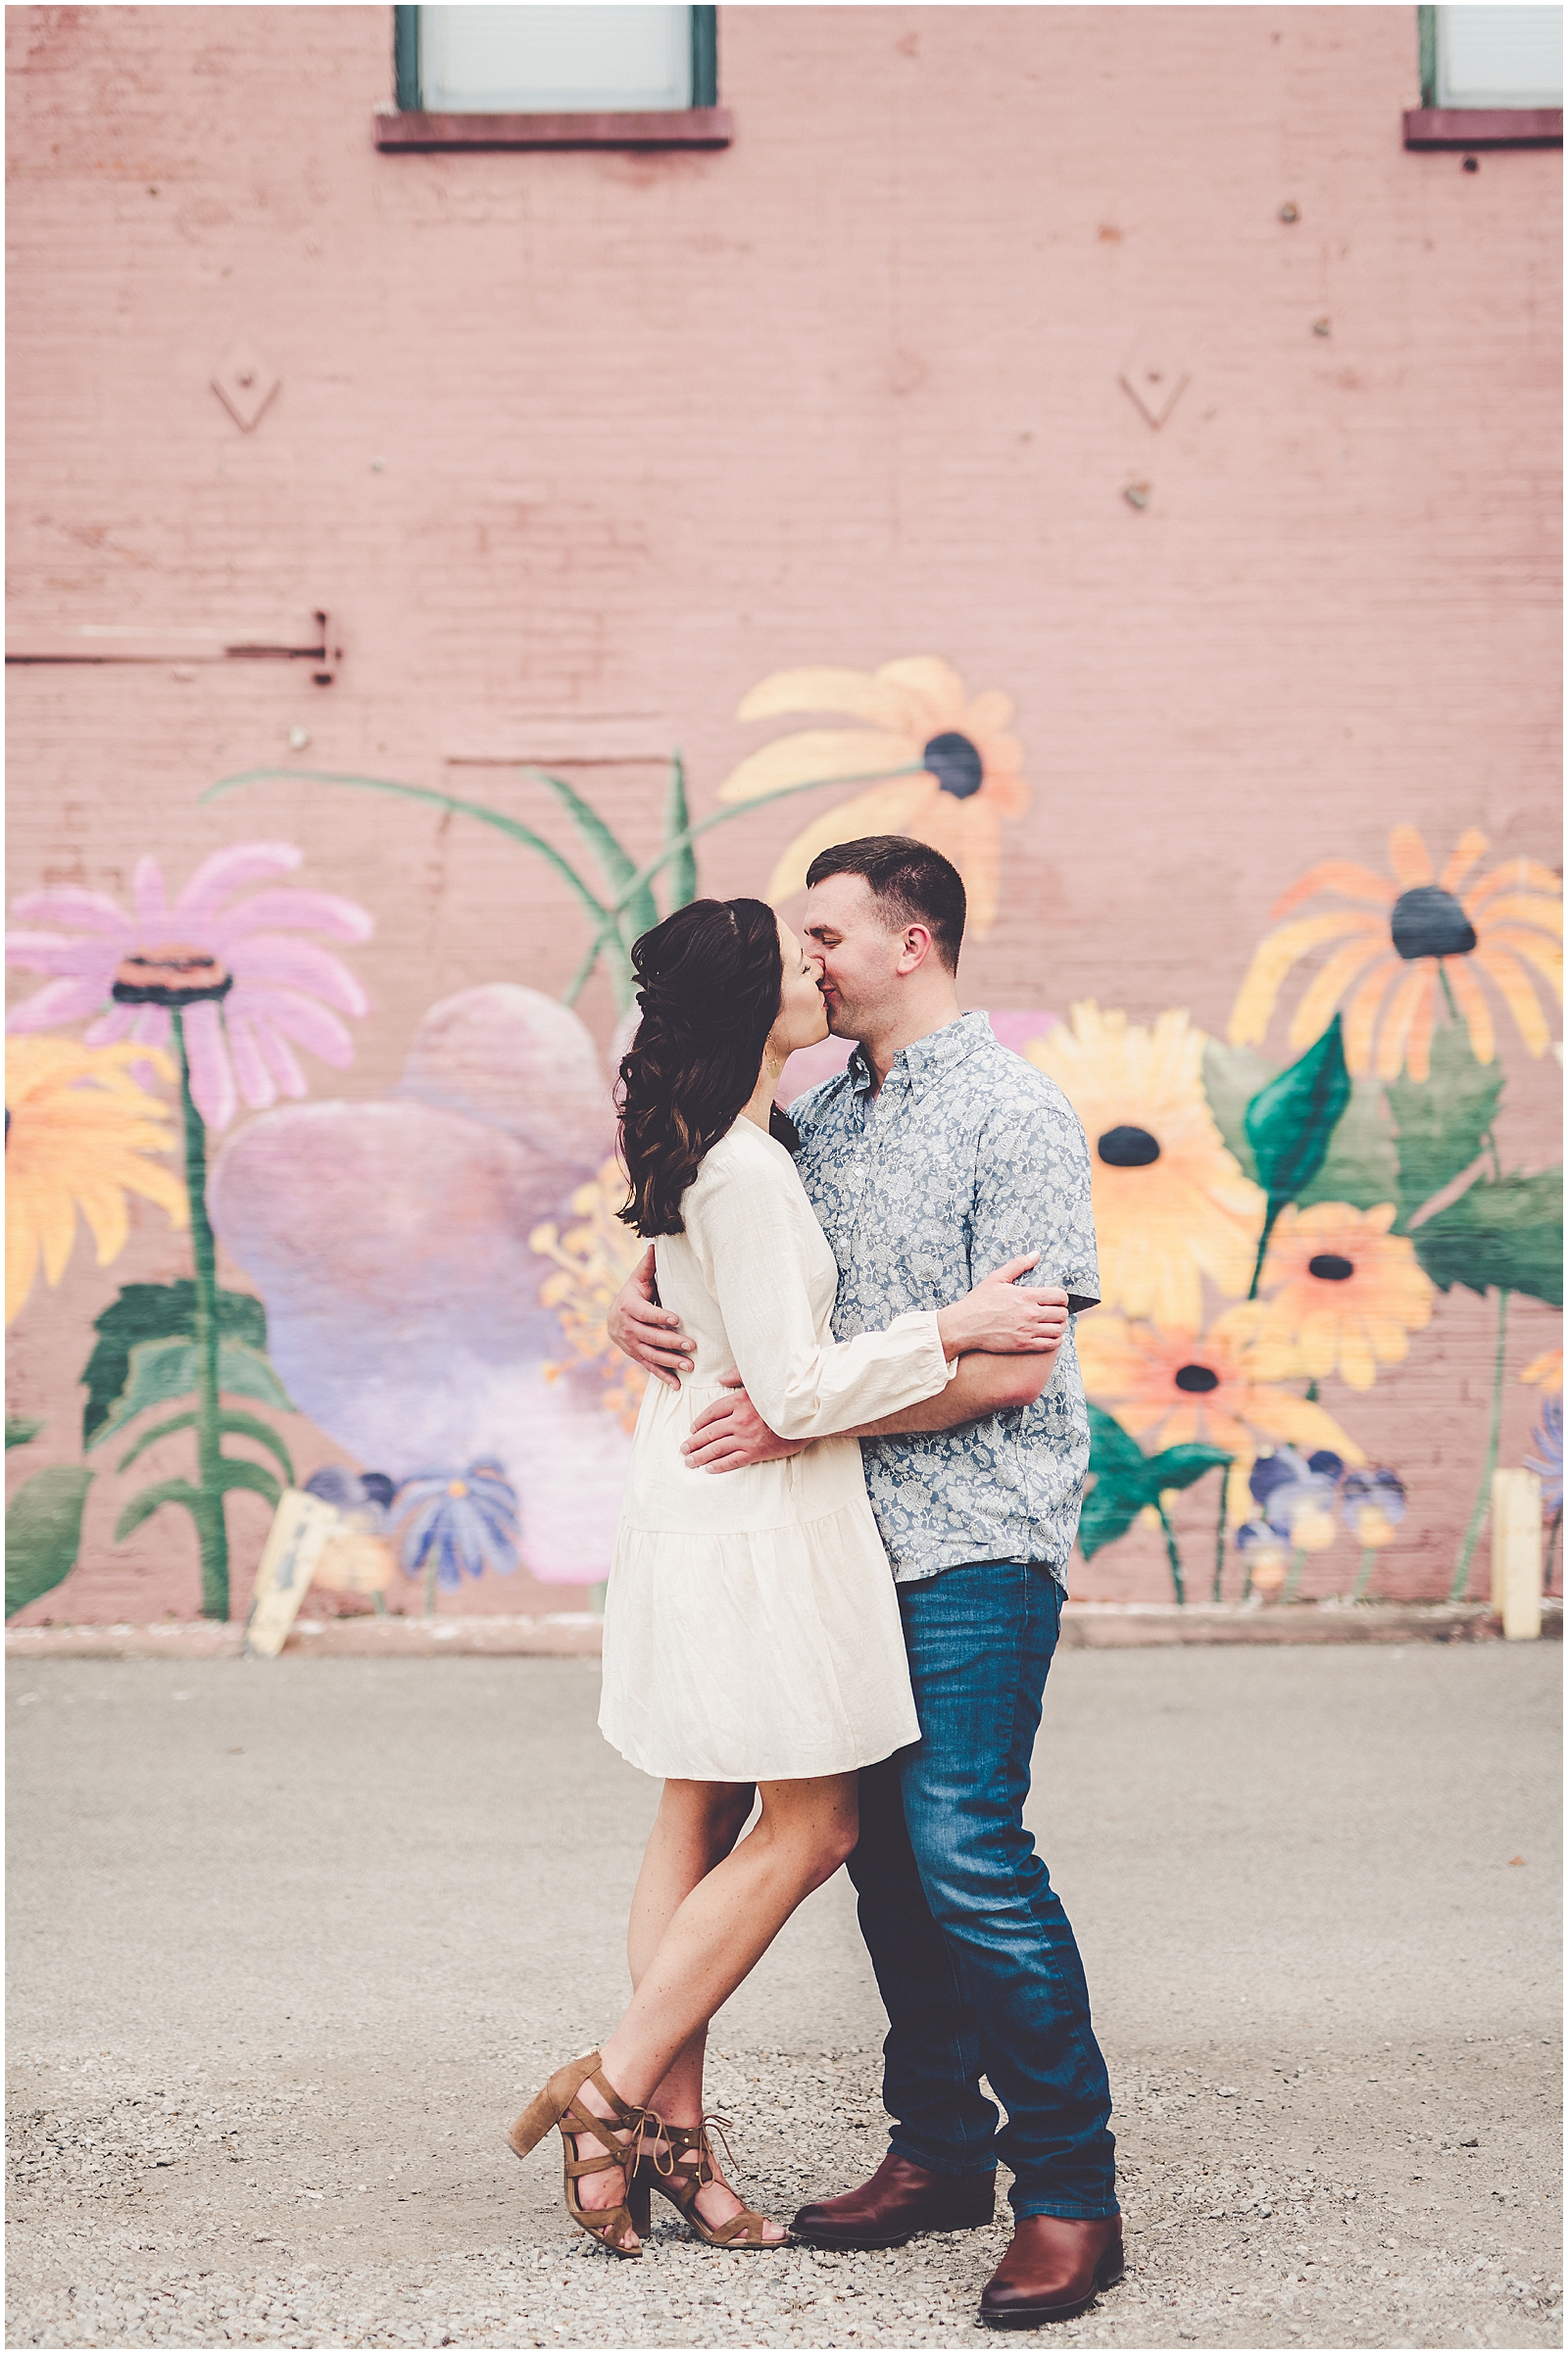 Allye & Grant's downtown engagement session in Springfield, Illinois with Chicagoland wedding photographer Kara Evans Photographer.